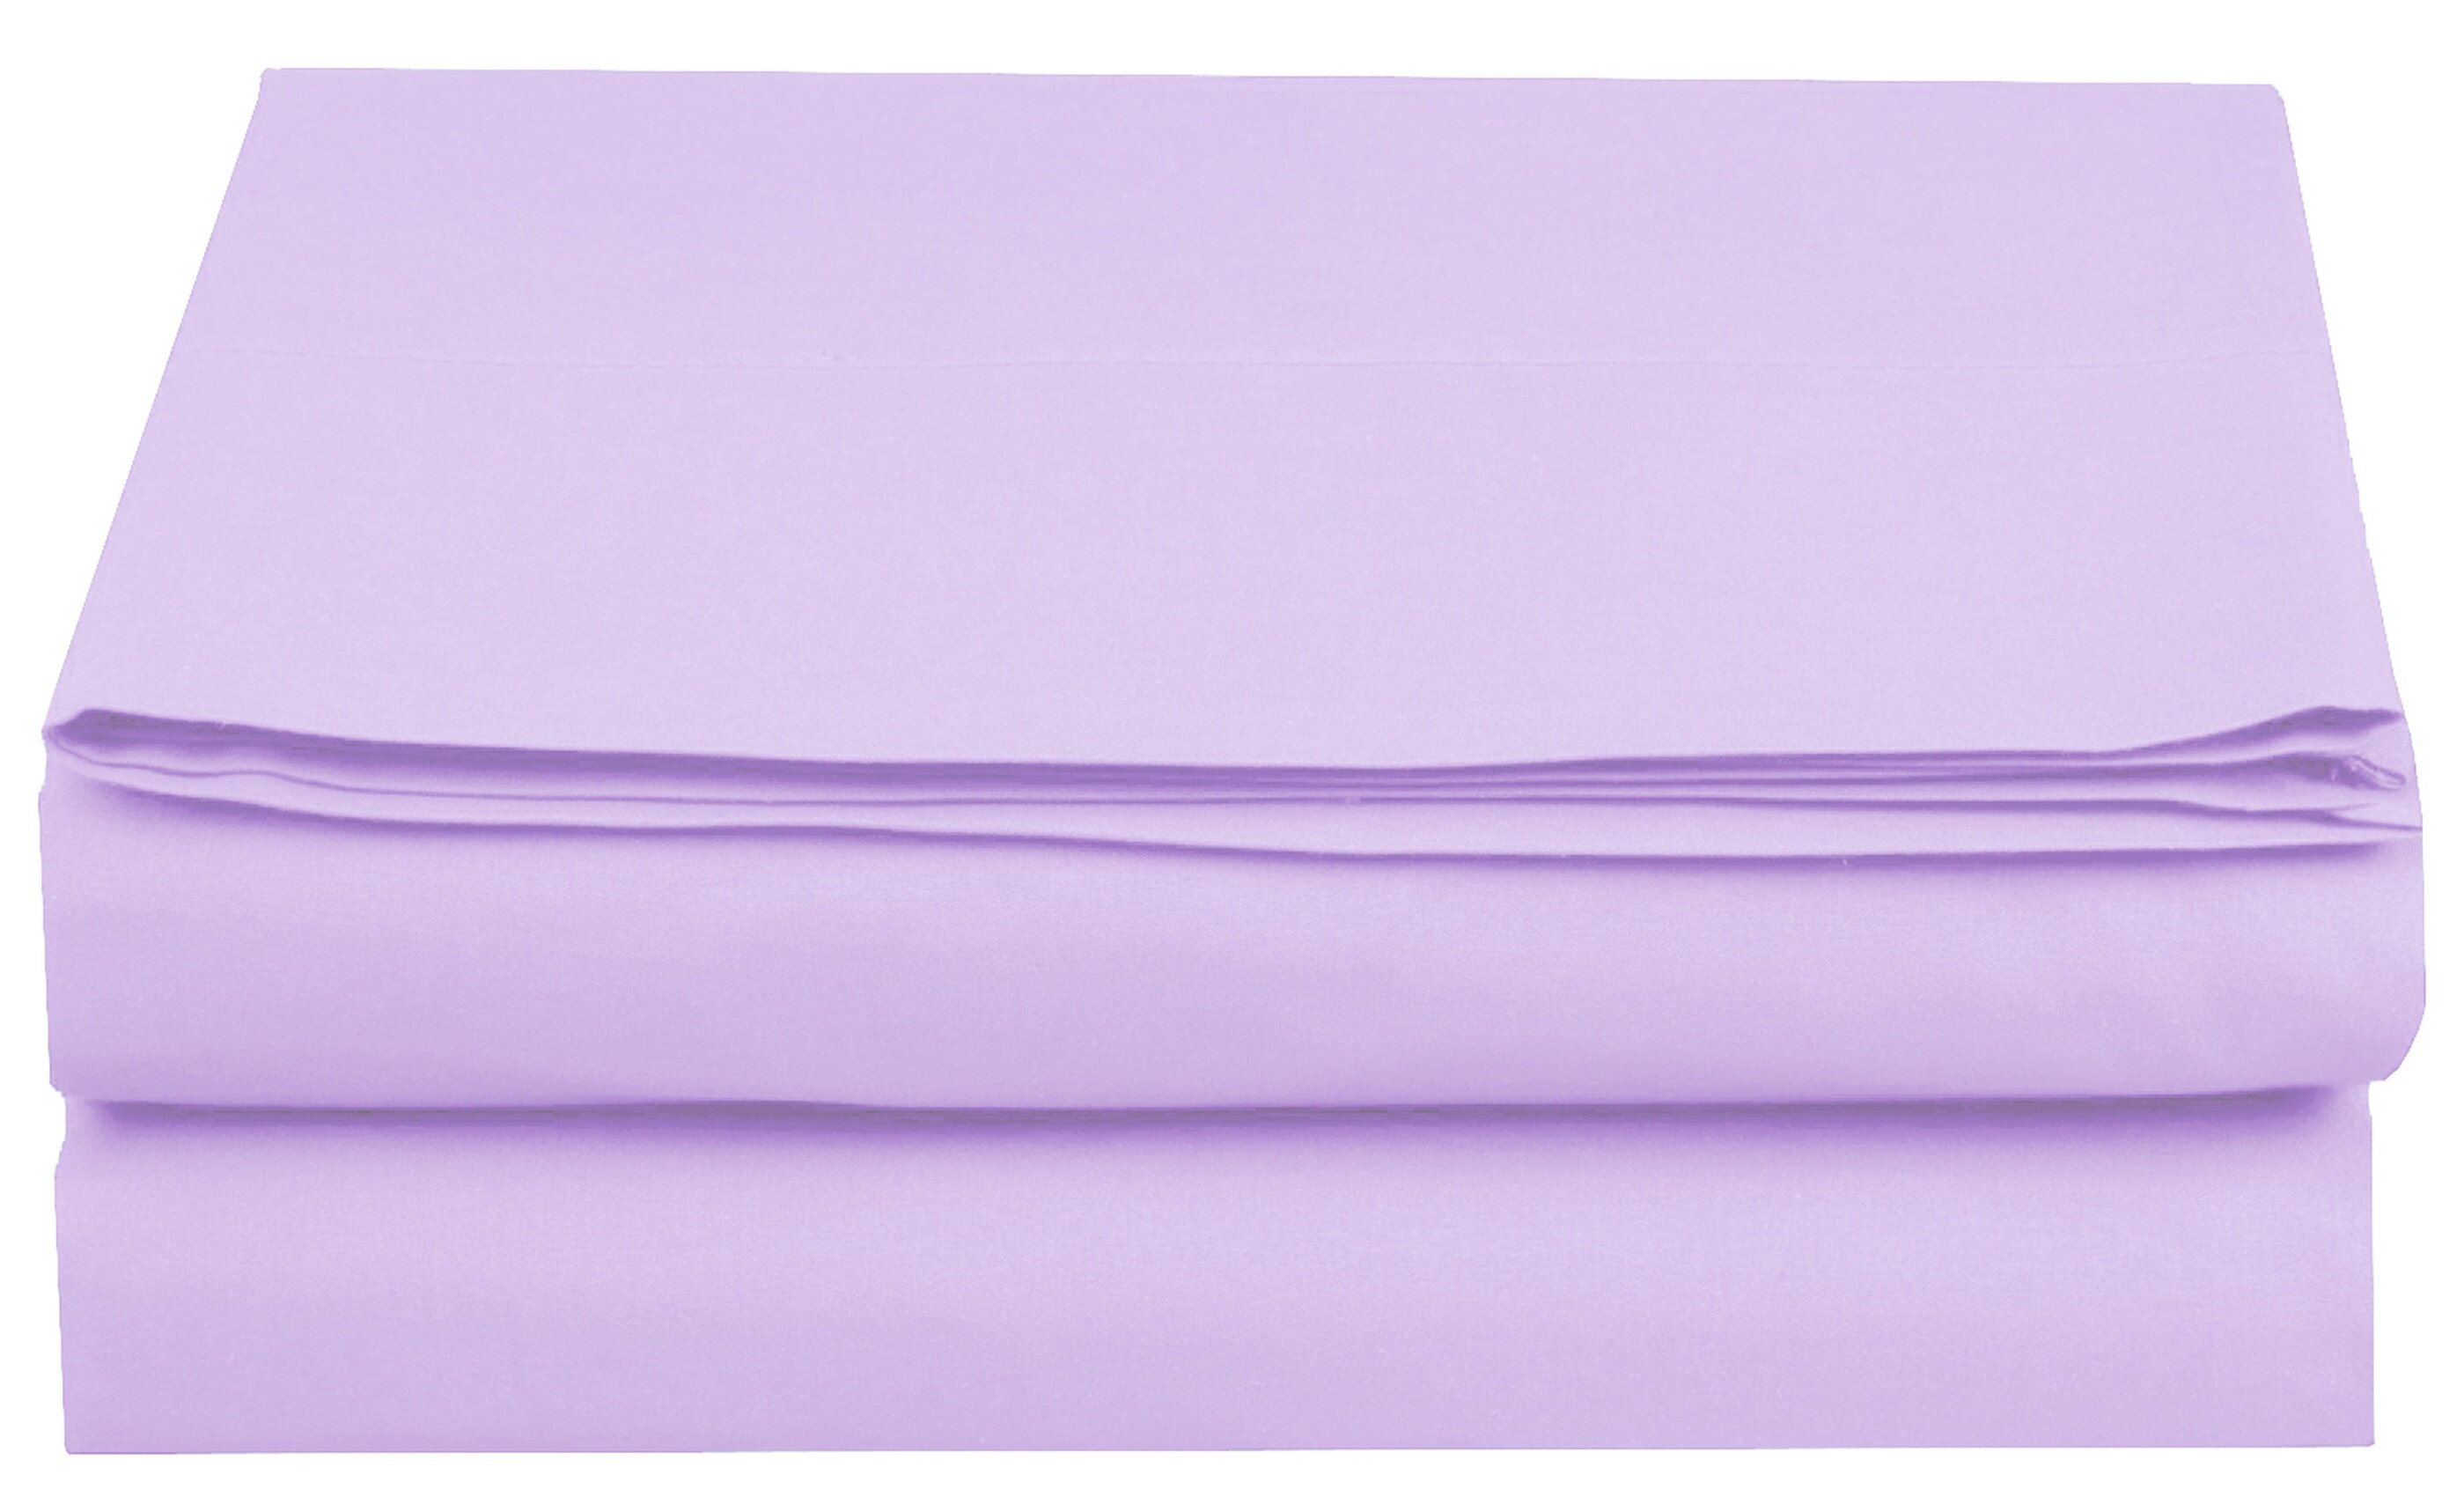 Full Tache Home Fashion Solid Light Purple Bed Sheet Soft Lavender Lilac Fitted and Flat Luxury 4 Piece Sheet Set 